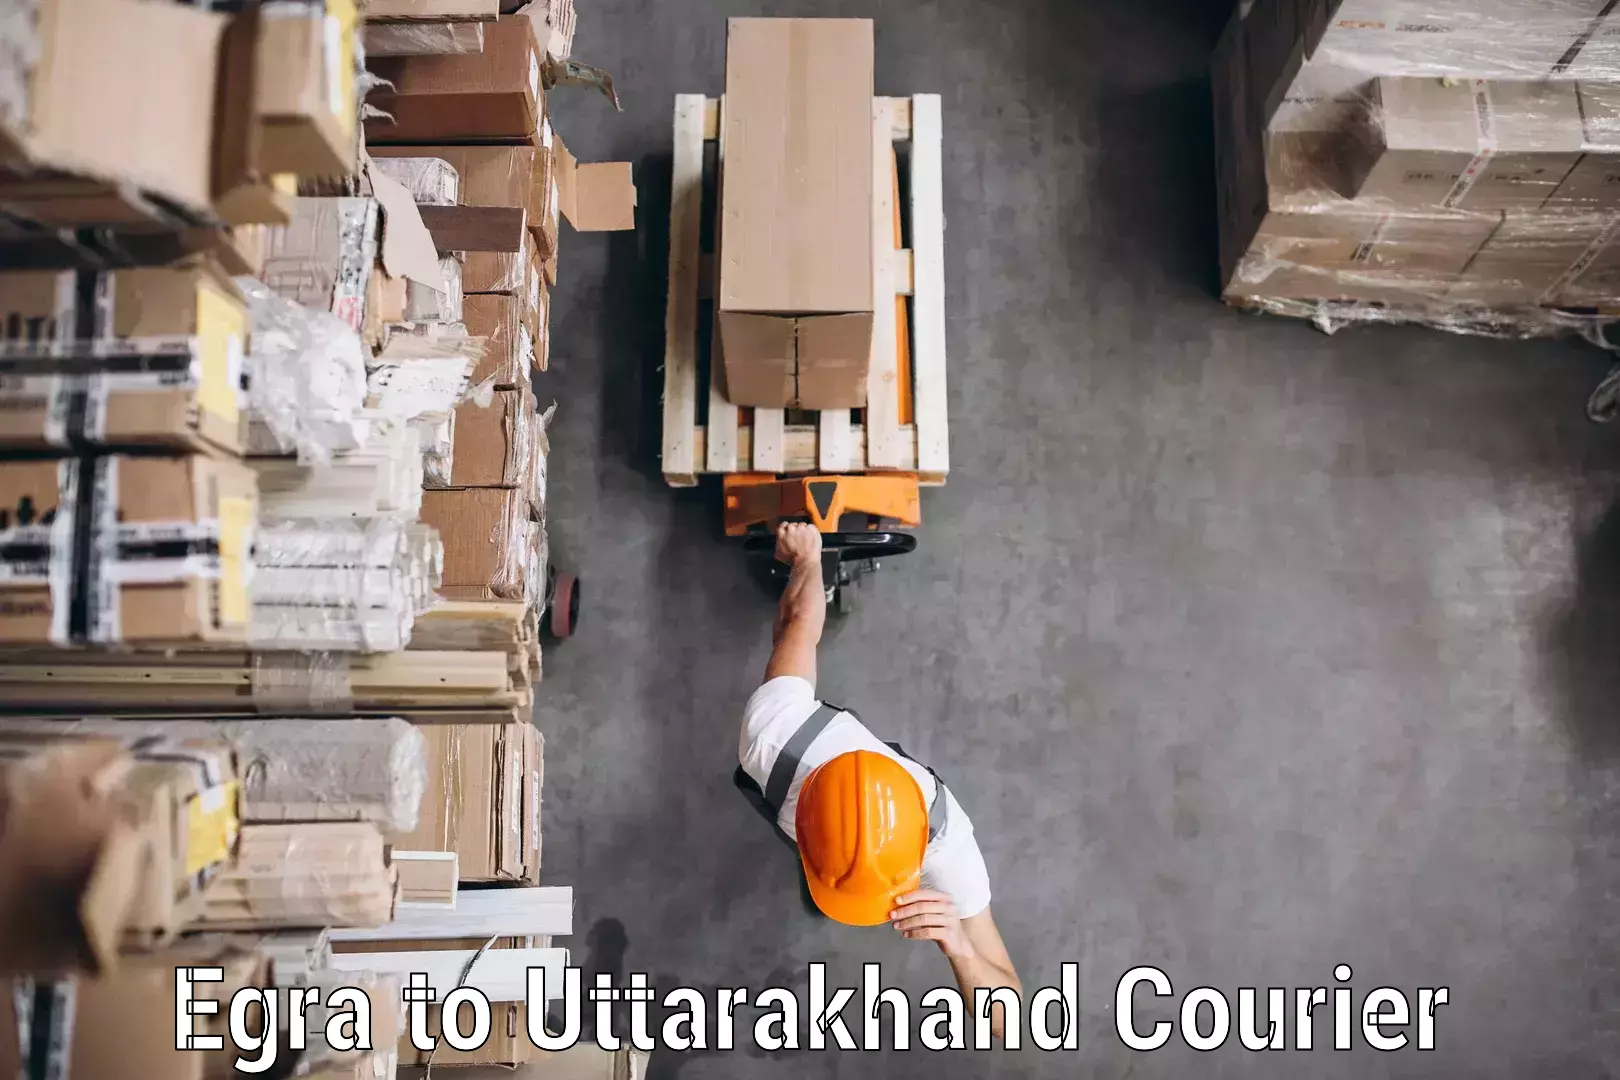 Reliable courier services Egra to Uttarakhand